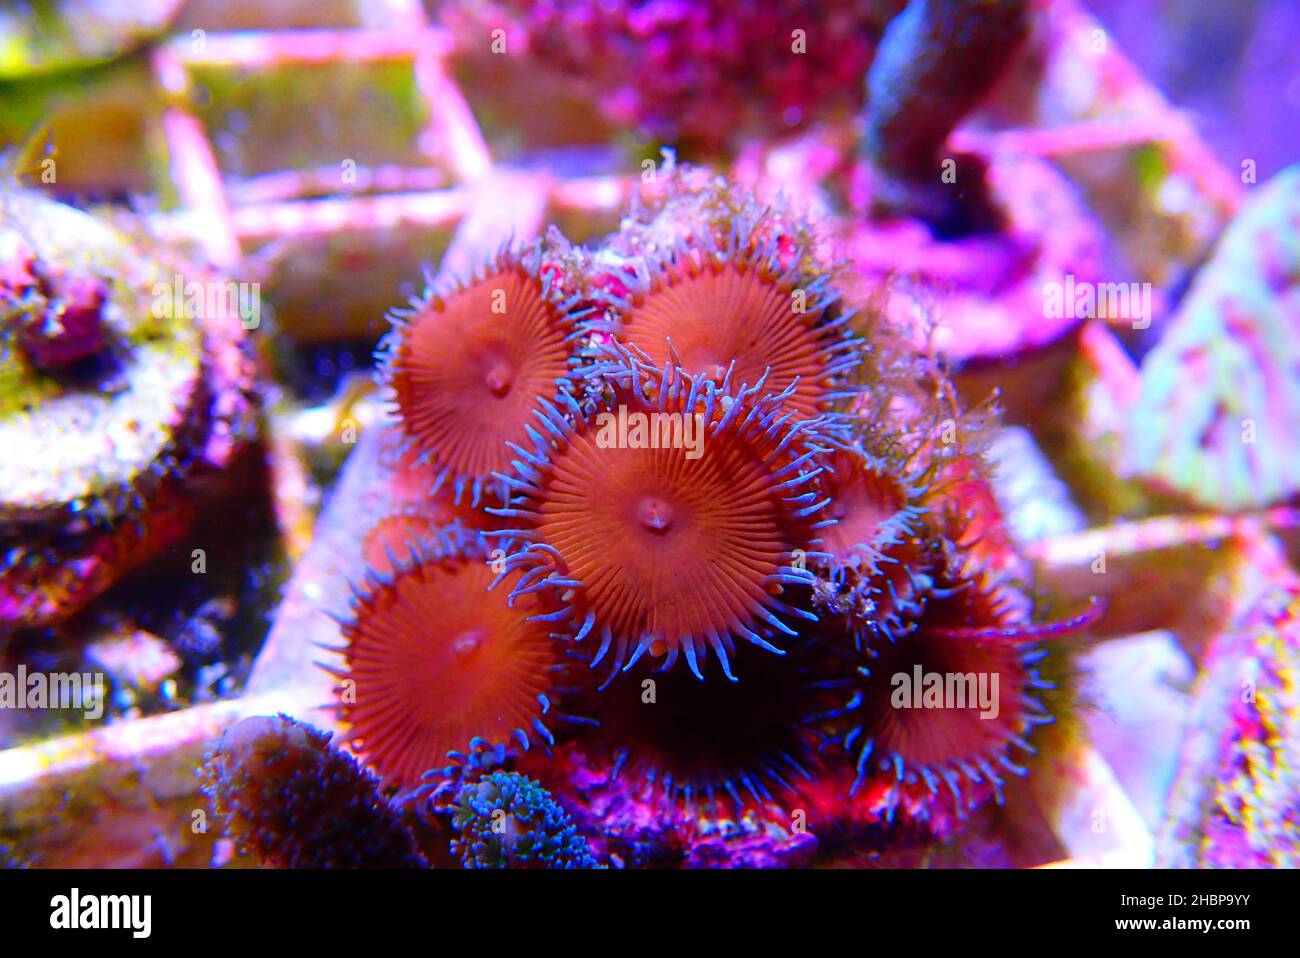 'Red Death' small colony of amazing colorful palythoa polyps Stock Photo